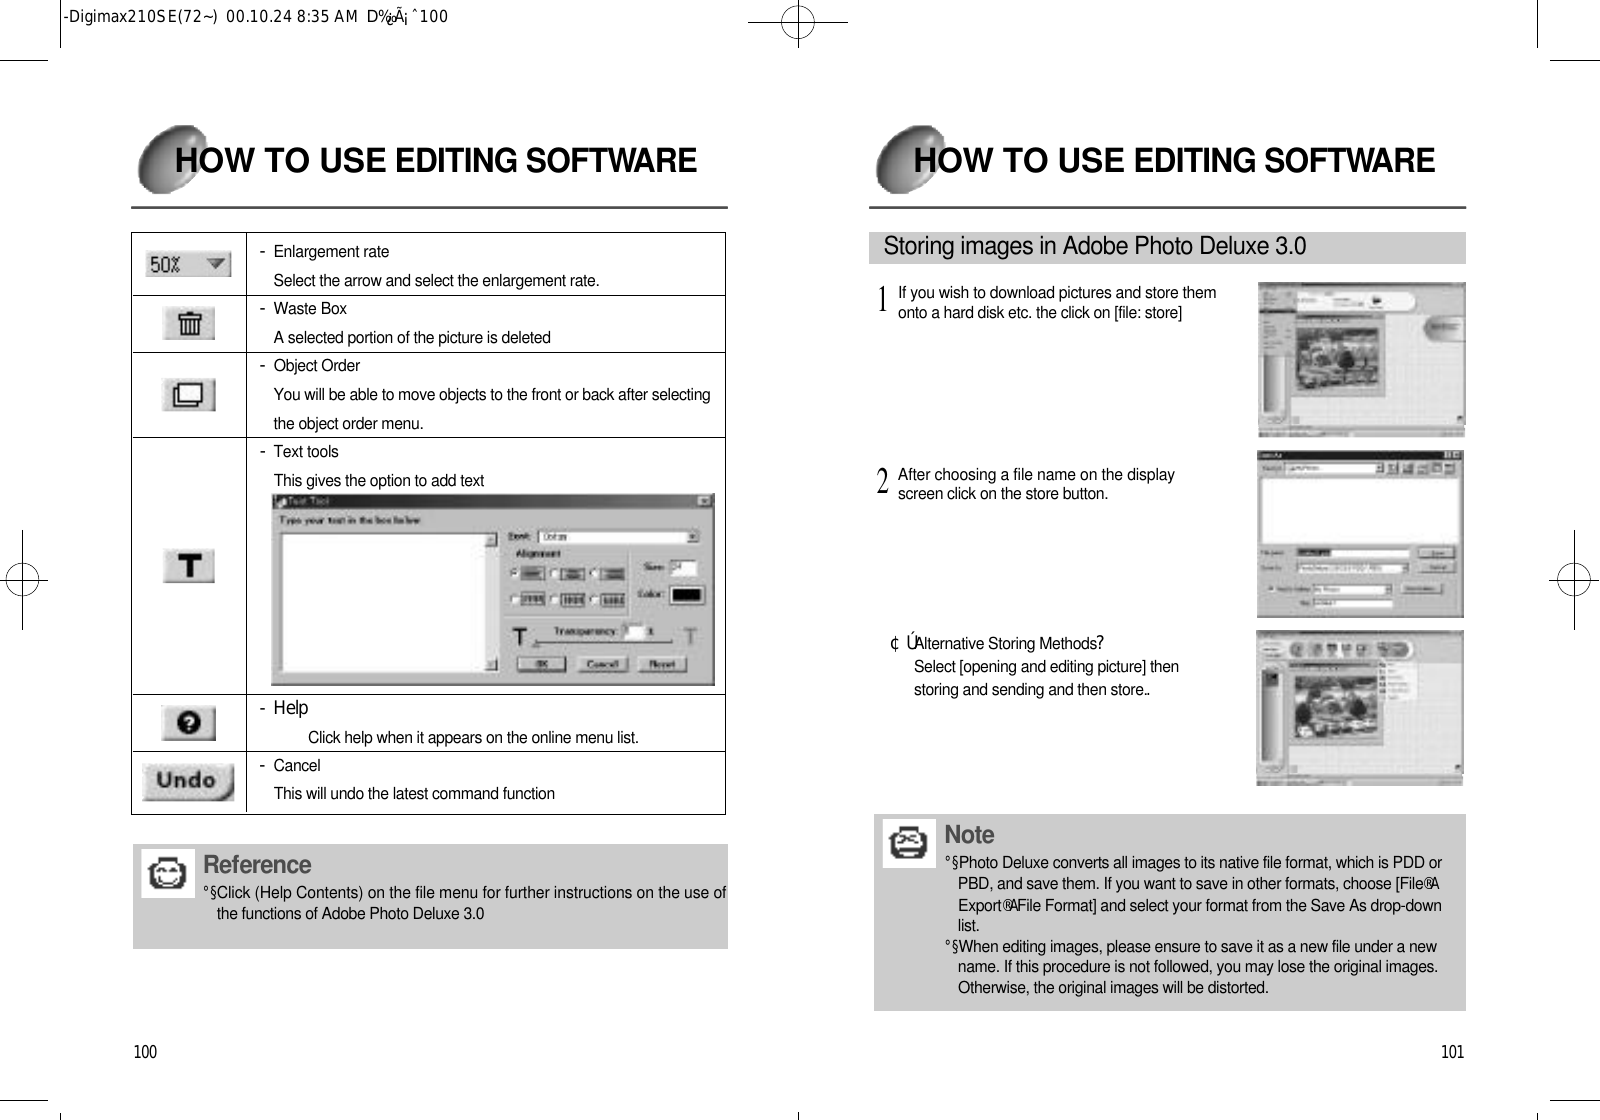 1 0 1HOW TO USEEDITING SOFTWA R E¢ÚAlternative Storing Methods? Select [opening and editing picture] thenstoring and sending and then store..S t o ring images in Adobe Photo Deluxe 3.0 N o t e°§Photo Deluxe converts all images to its native file format, which is PDD orPBD, and save them. If you want to save in other formats, choose [File®AE x p o r t®AFile Format] and select your format from the Save As drop-downl i s t .°§When editing images, please ensure to save it as a new file under a newname. If this procedure is not followed, you may lose the original images.Otherwise, the original images will be distorted.If you wish to download pictures and store themonto a hard disk etc. the click on [file: store]1After choosing a file name on the displayscreen click on the store button.21 0 0HOW TO USEEDITING SOFTWA R E- Enlargement rateSelect the arrow and select the enlargement rate.- Waste BoxA selected portion of the picture is deleted- Object OrderYou will be able to move objects to the front or back after selectingthe object order menu.- Text toolsThis gives the option to add text- HelpClick help when it appears on the online menu list.- C a n c e lThis will undo the latest command functionR e fe r e n c e°§Click (Help Contents) on the file menu for further instructions on the use ofthe functions of Adobe Photo Deluxe 3.0-Digimax210SE(72~)  00.10.24 8:35 AM  D‰¿Ã¡ˆ100